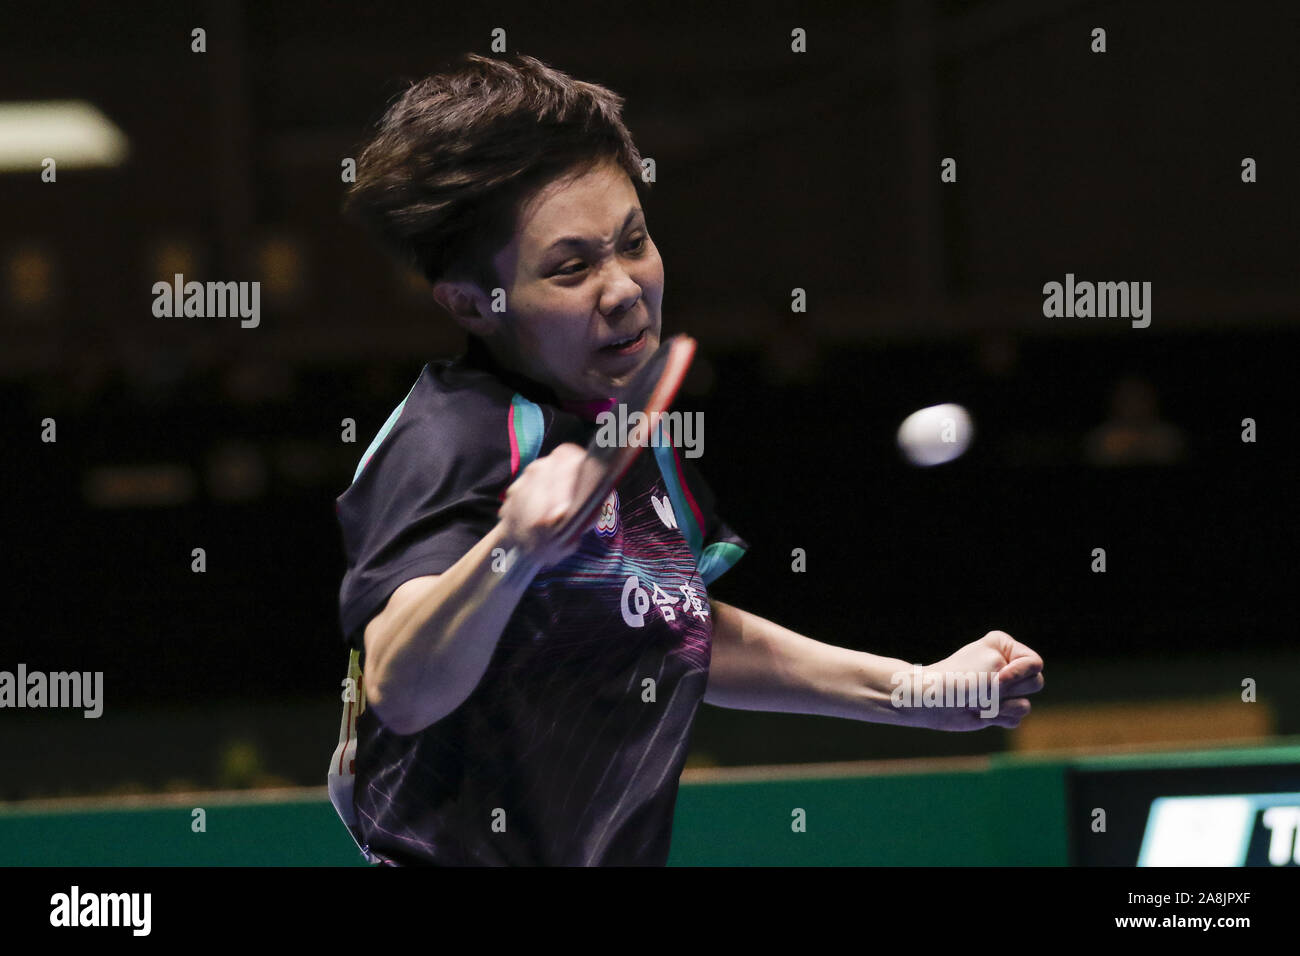 Tokyo, Japan. 9th Nov, 2019. I-Ching Cheng of Chinese Taipei in action against Meng Chen of China during the Women's Teams Semifinals match at the International Table Tennis Federation (ITTF) Team World Cup Tokyo 2019 at Tokyo Metropolitan Gymnasium. China defeats Chinese Taipei 3-0. Credit: Rodrigo Reyes Marin/ZUMA Wire/Alamy Live News Stock Photo